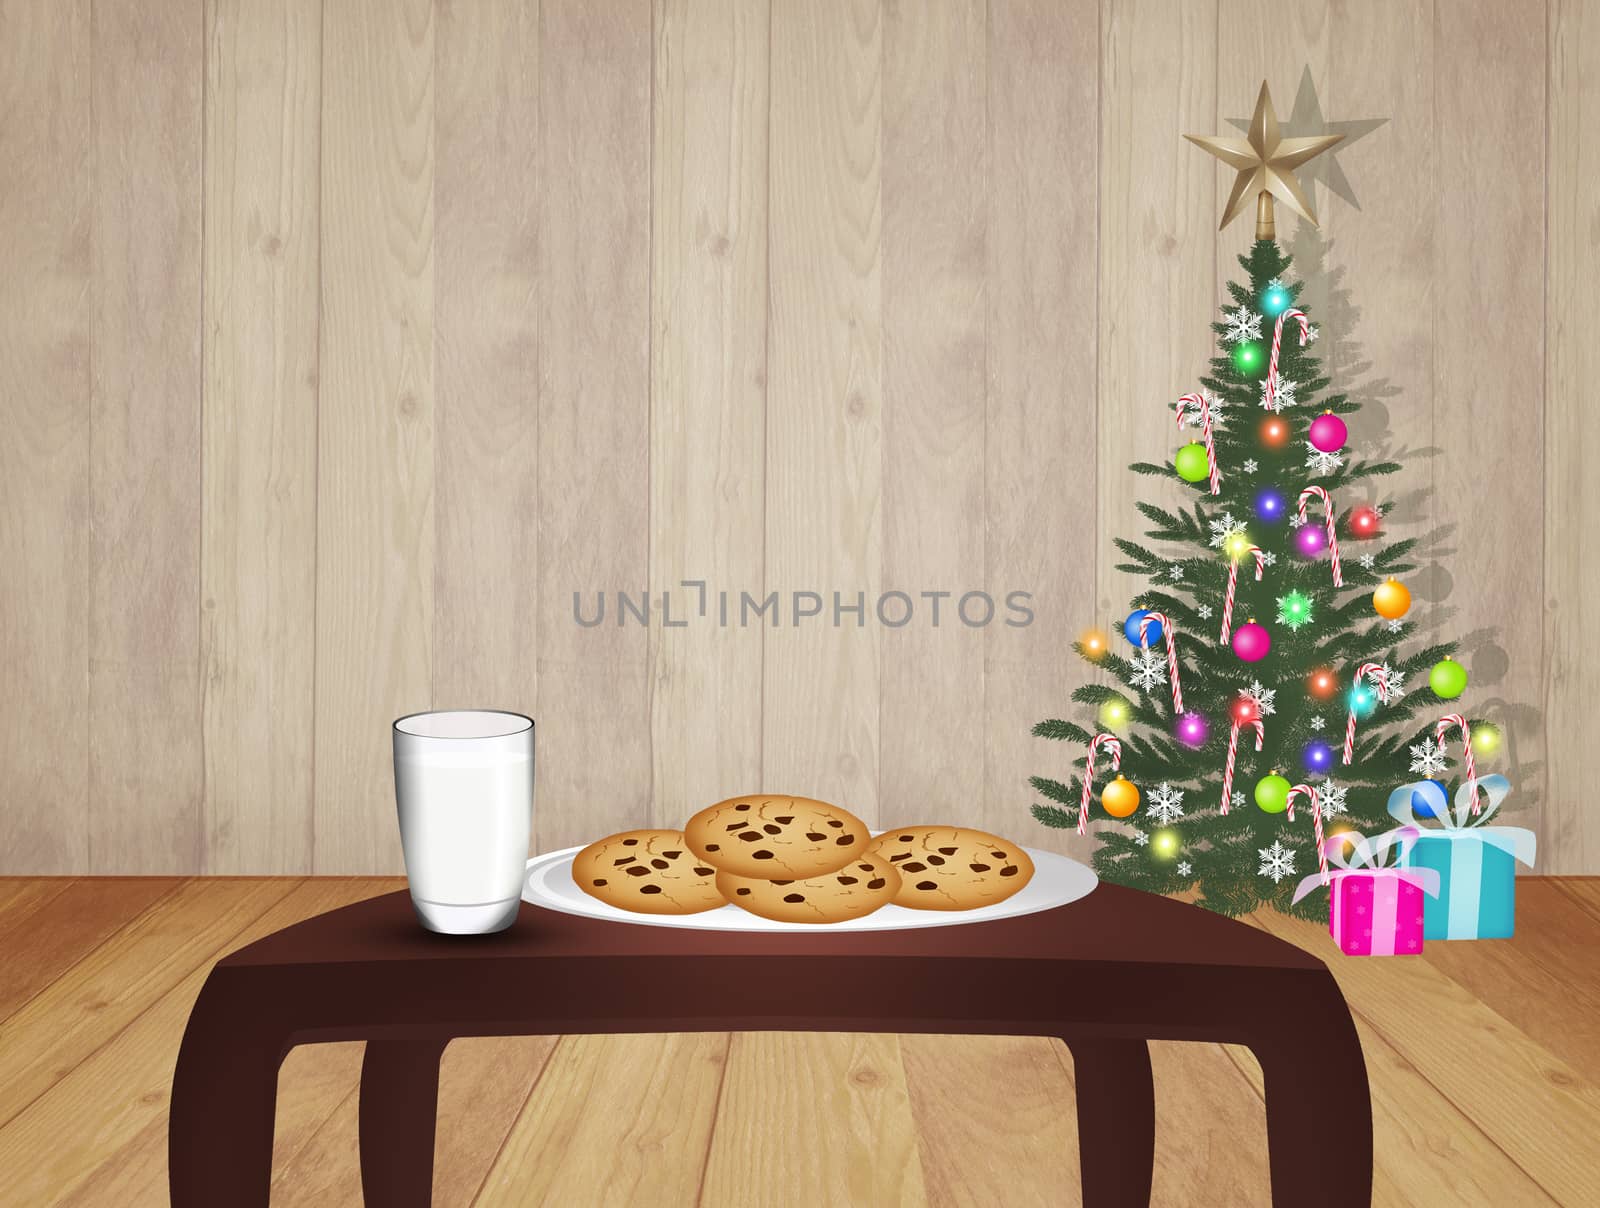 cookies and milk for Santa Claus by adrenalina